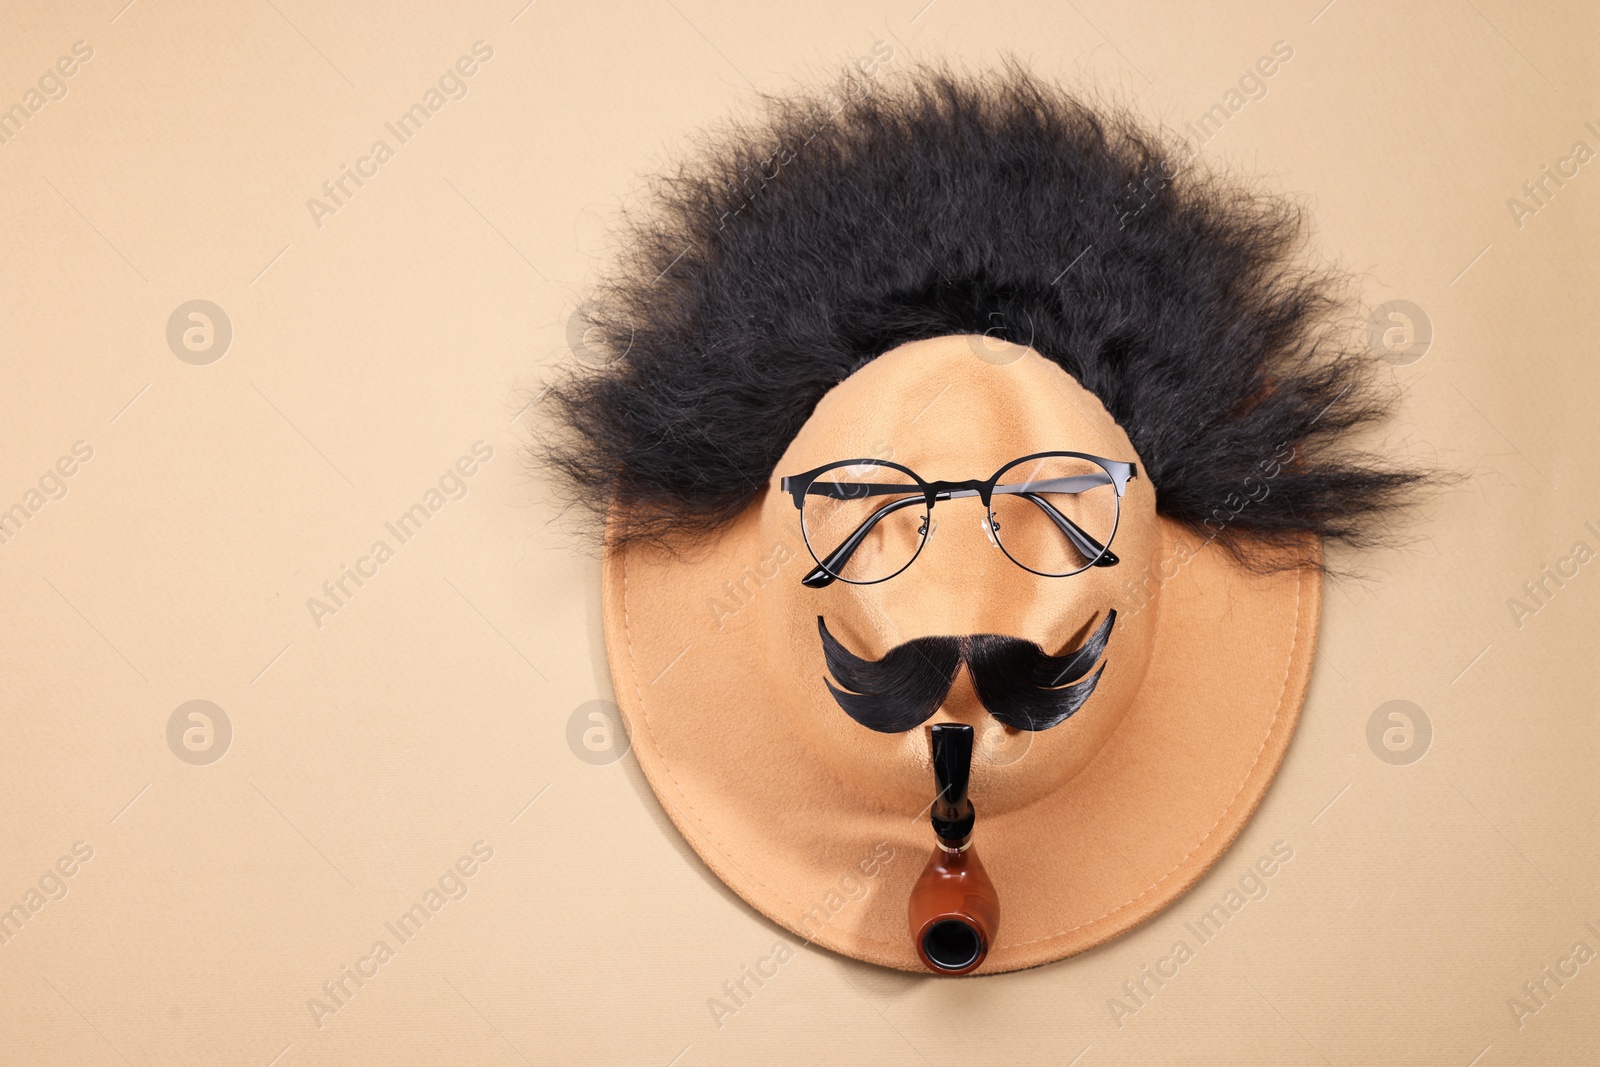 Photo of Man's face made of artificial hair, mustache, glasses and hat on beige background, top view. Space for text